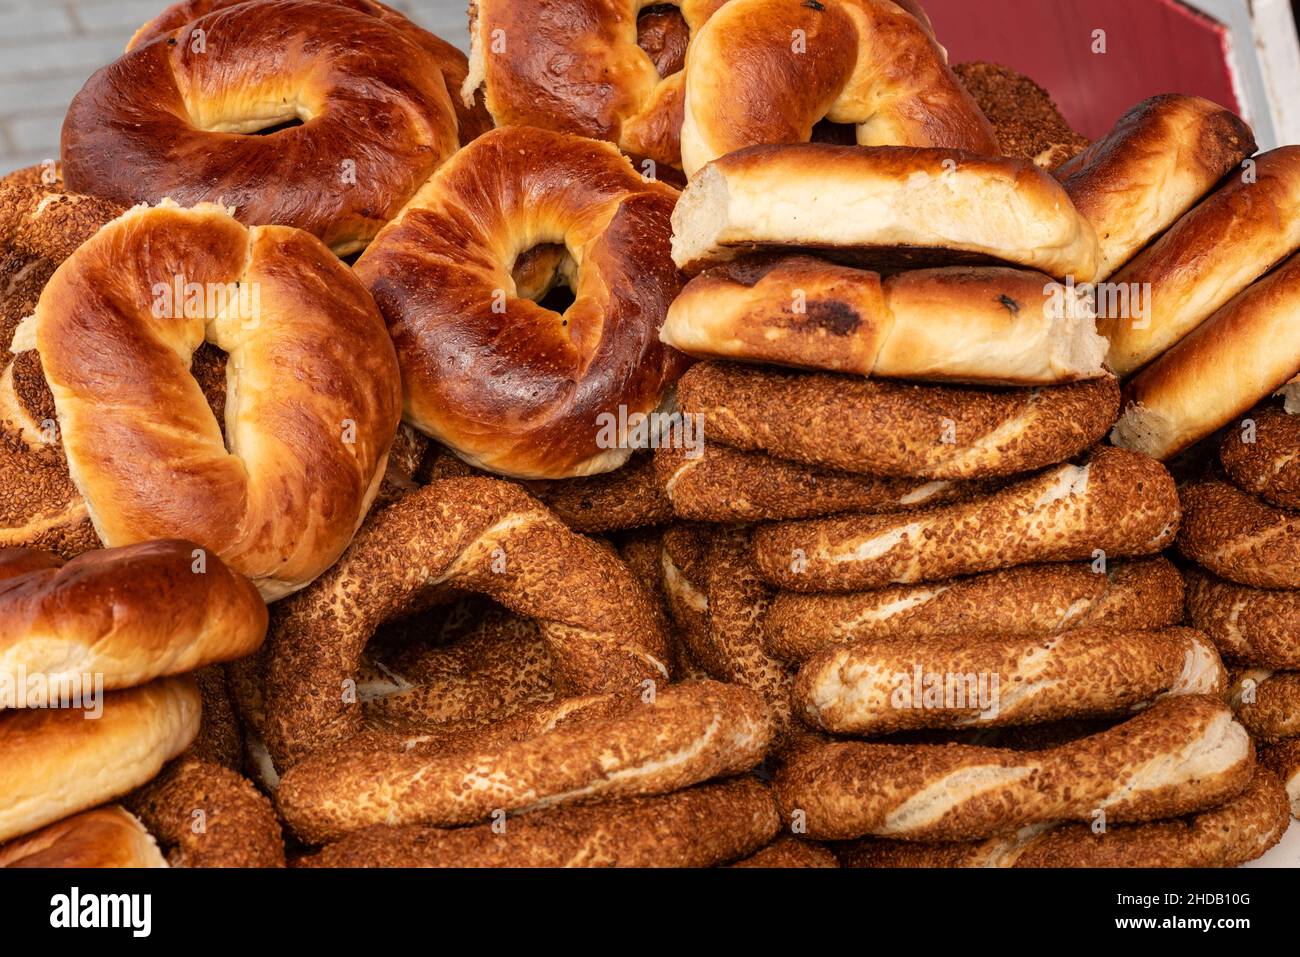 Traditional Turkish Simit and Sticky Buns for sale from a street vendor, popular street food in Istanbul, Turkey. Stock Photo